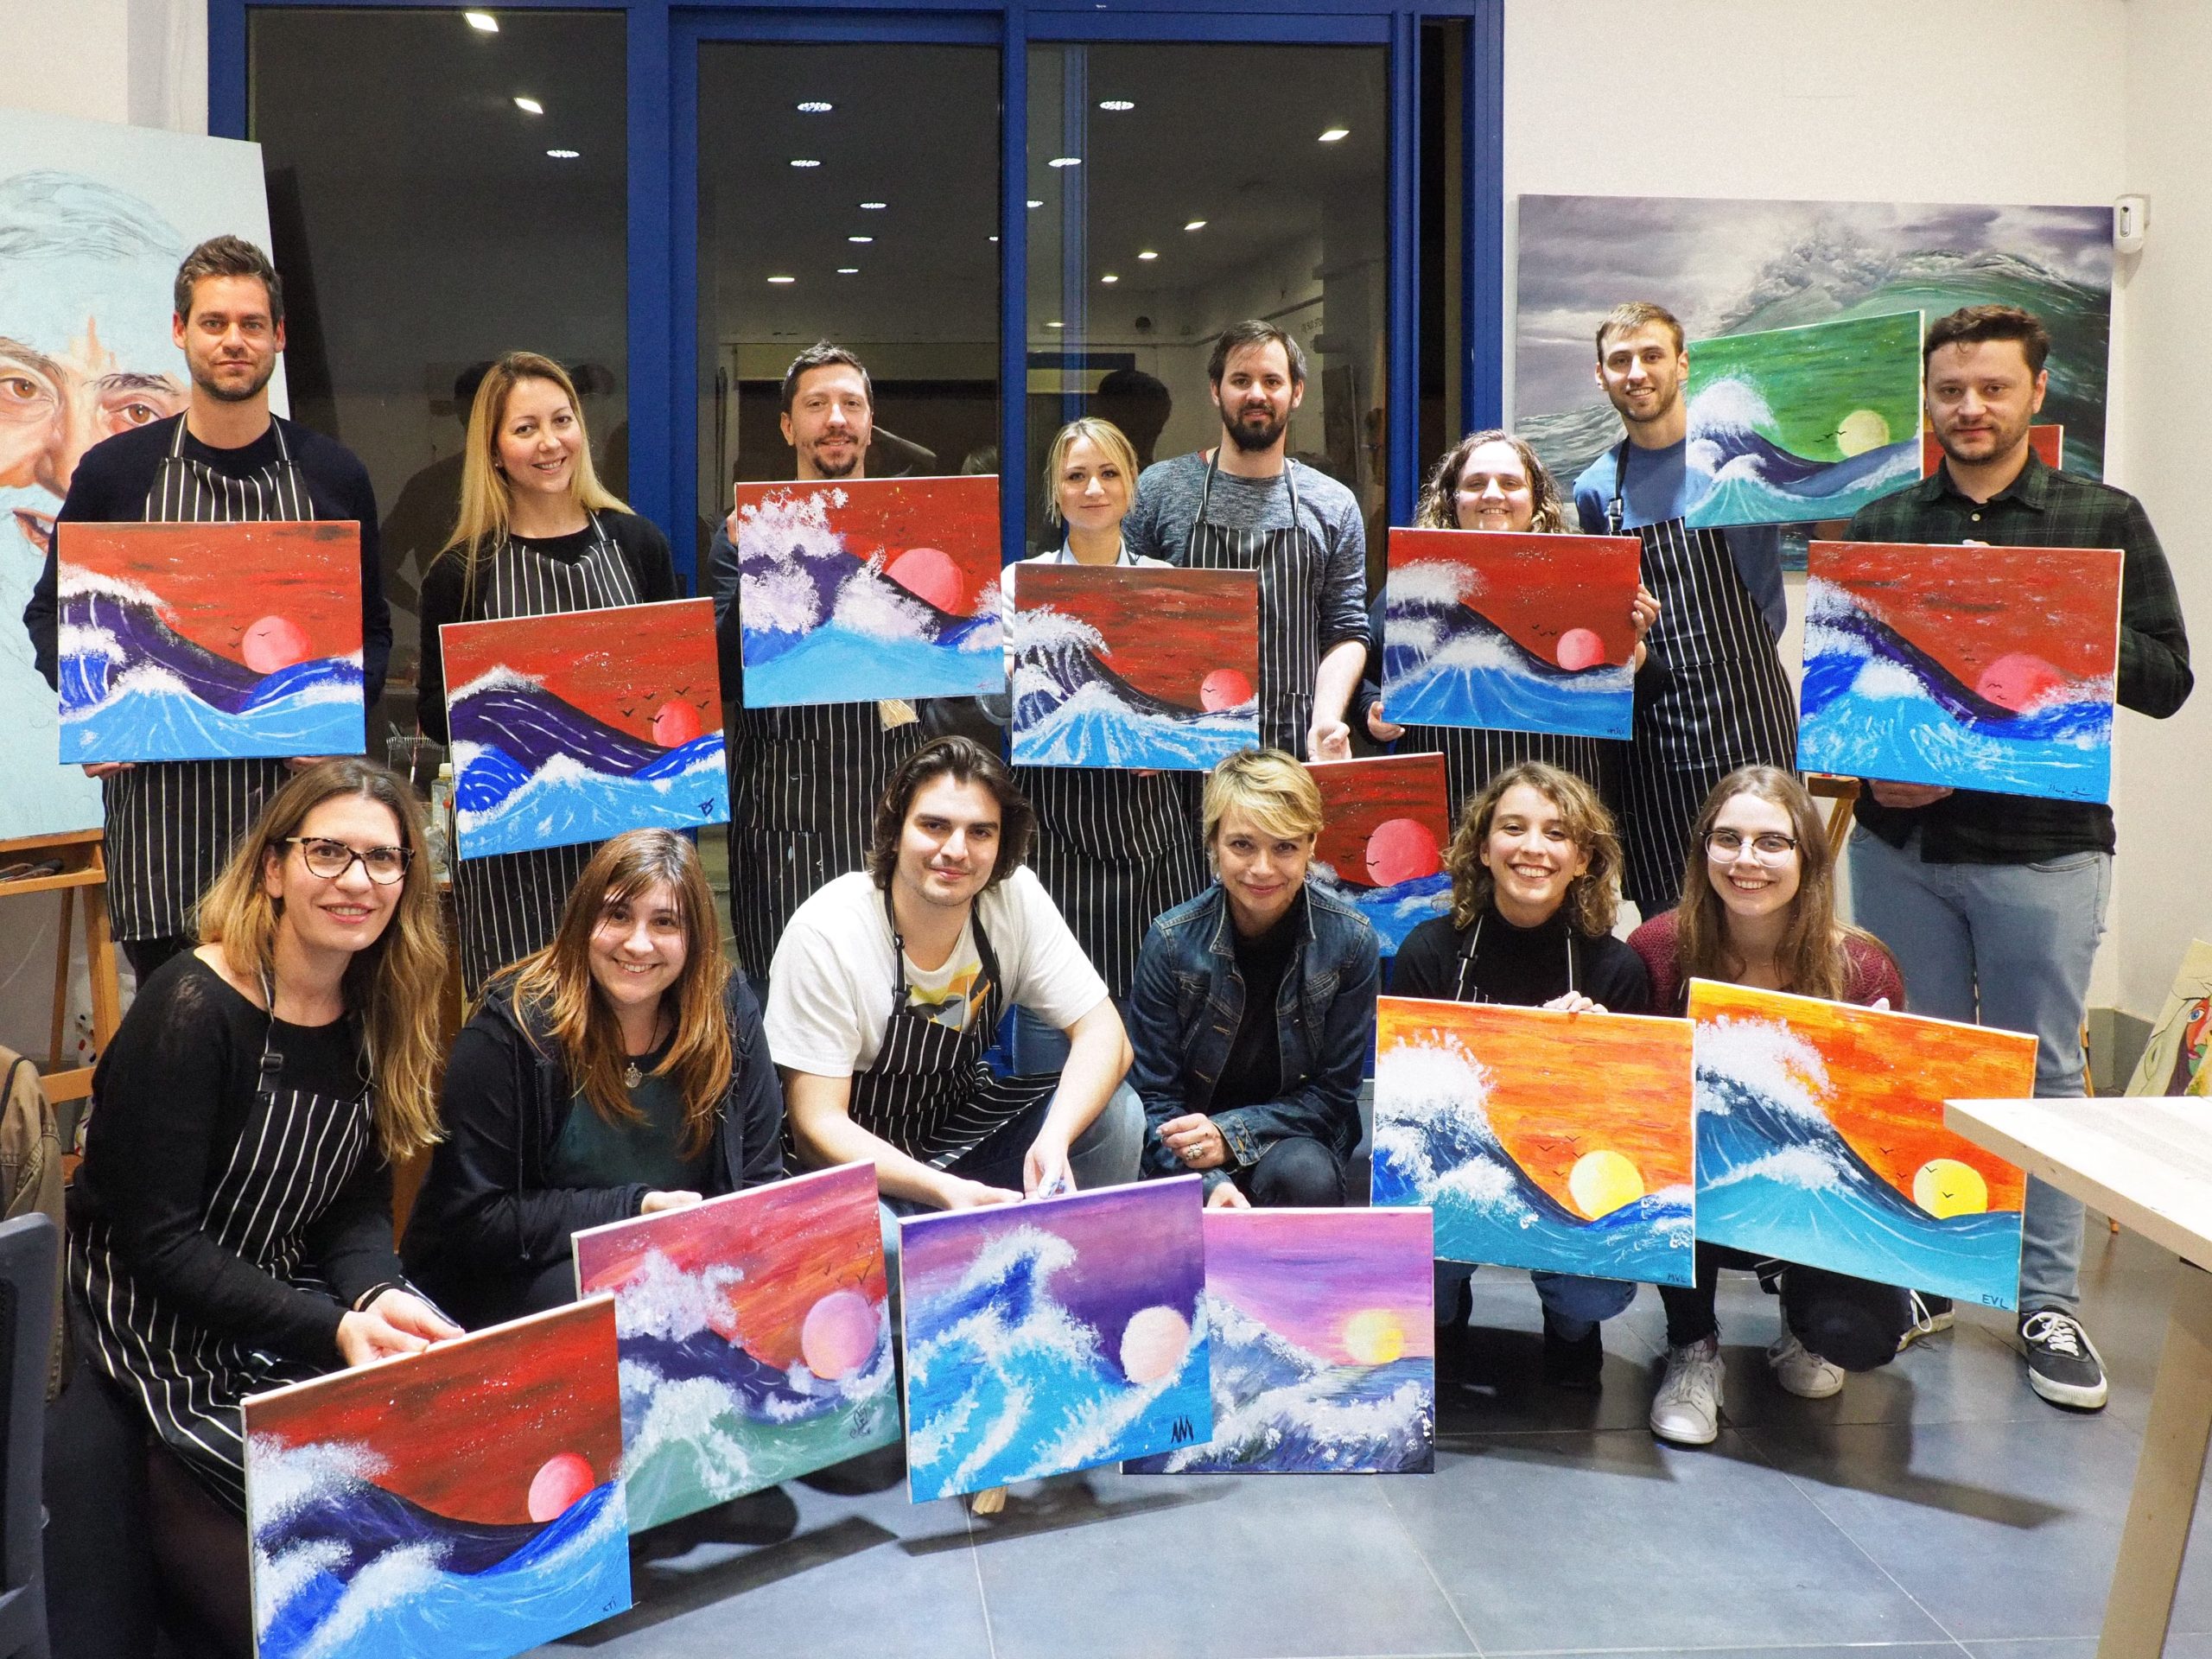 work team showing their finished paintings after the teambuilding session